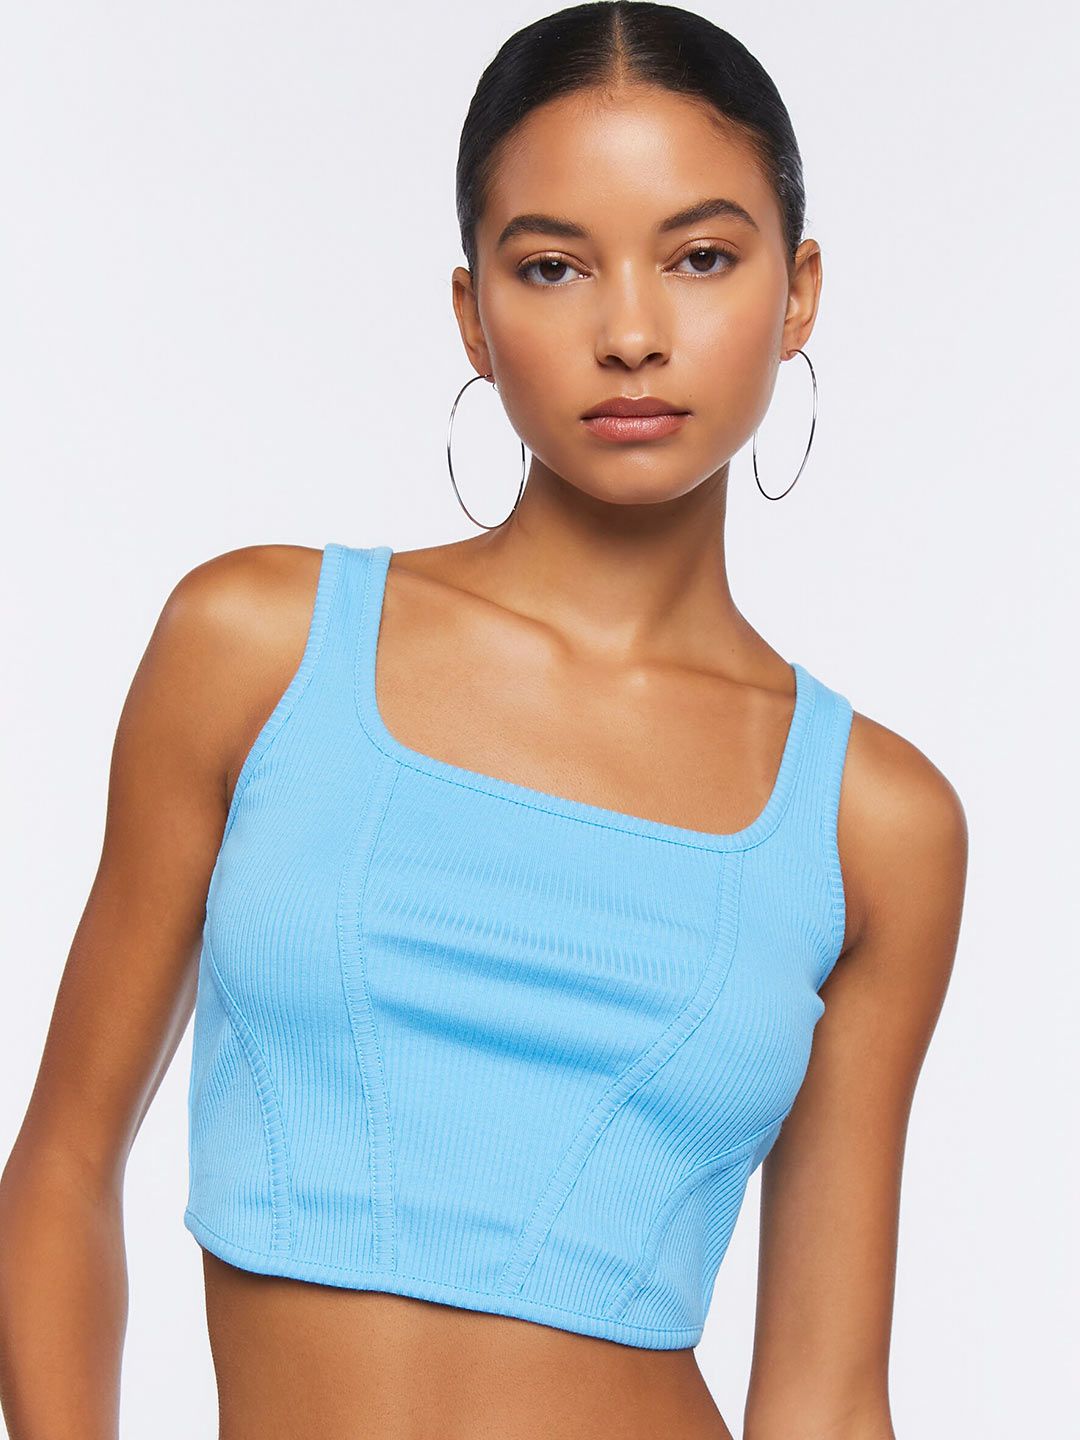 FOREVER 21 Women Blue Bralette Crop Top Price in India